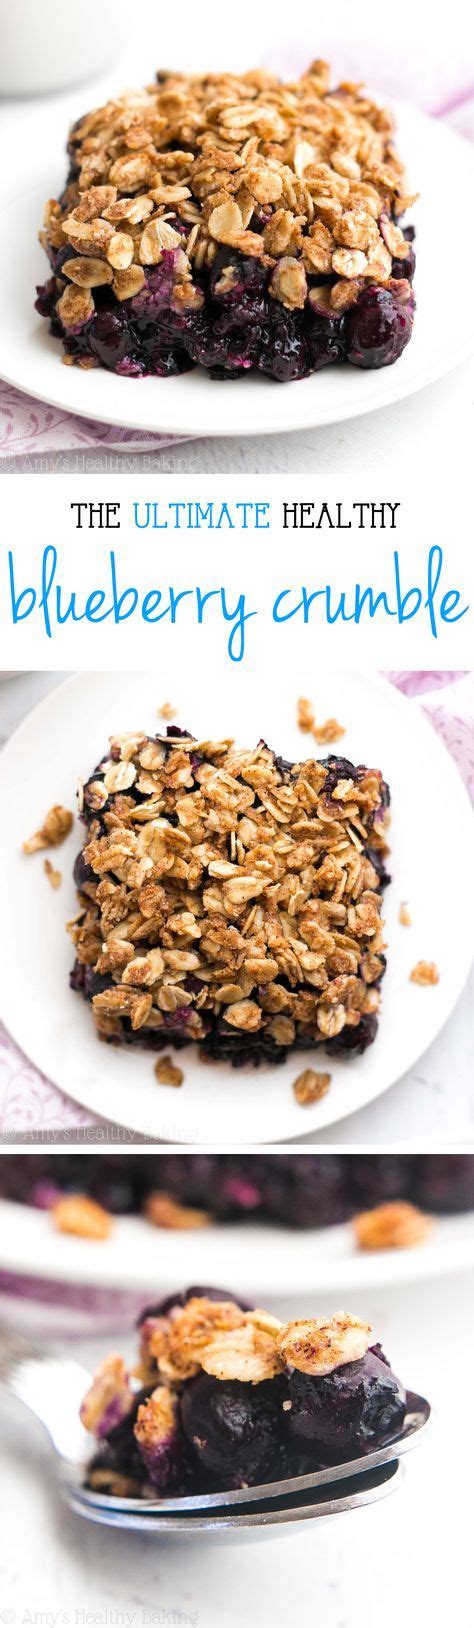 Home / recipes / keto desserts / fruit / 21 delicious low carb blueberry recipes. The Ultimate Healthy Blueberry Crumble -- this easy dessert is healthy enough for breakfast! It ...